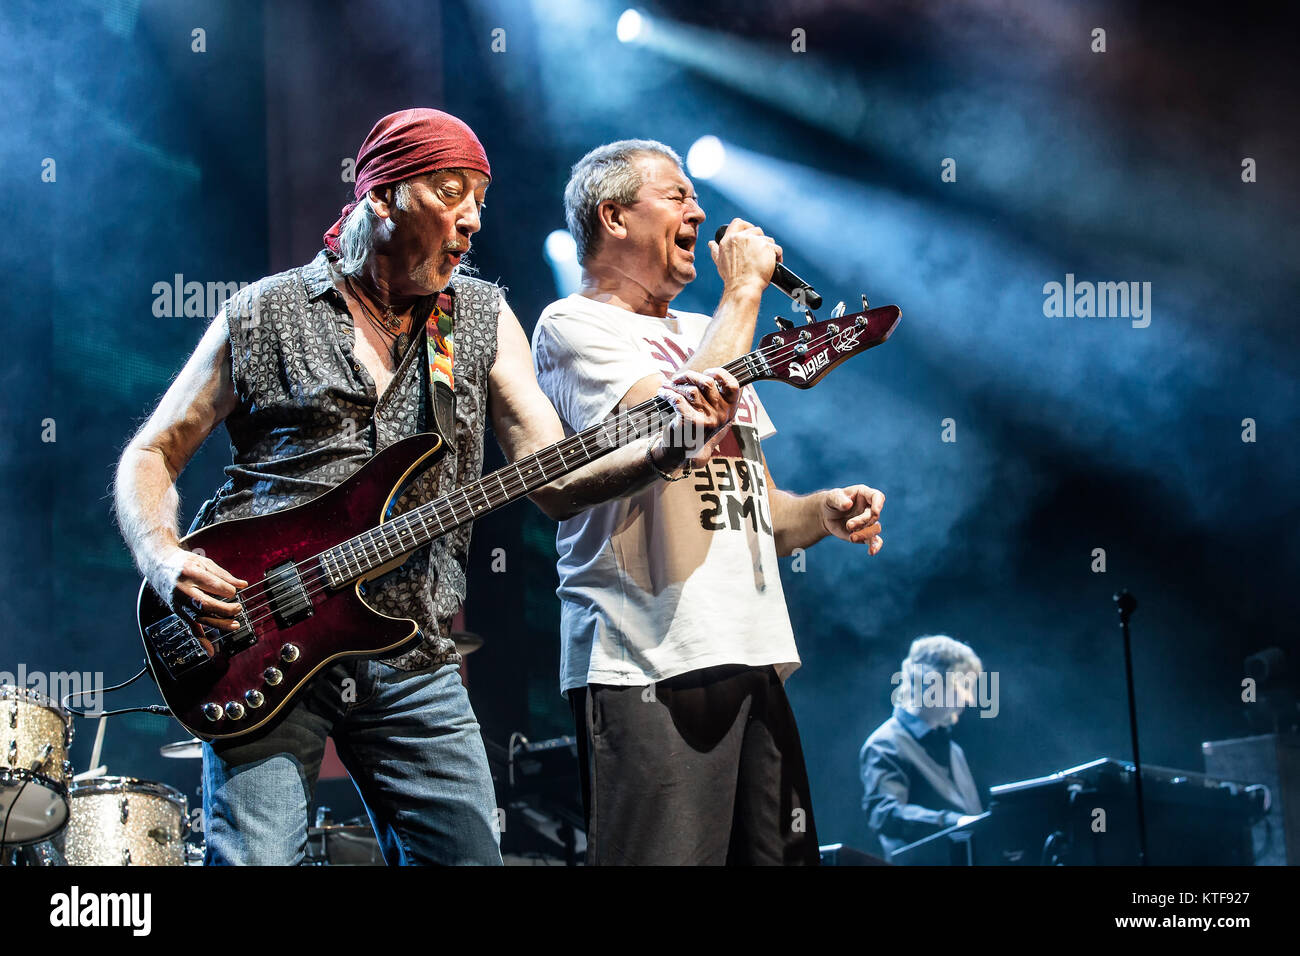 The English rock band Deep Purple performs a live concert at Oslo Spektrum. Here vocalist and songwriter Ian Gillan is seen live on stage with bass player Roger Glover. Norway, 04/02 2014. Stock Photo